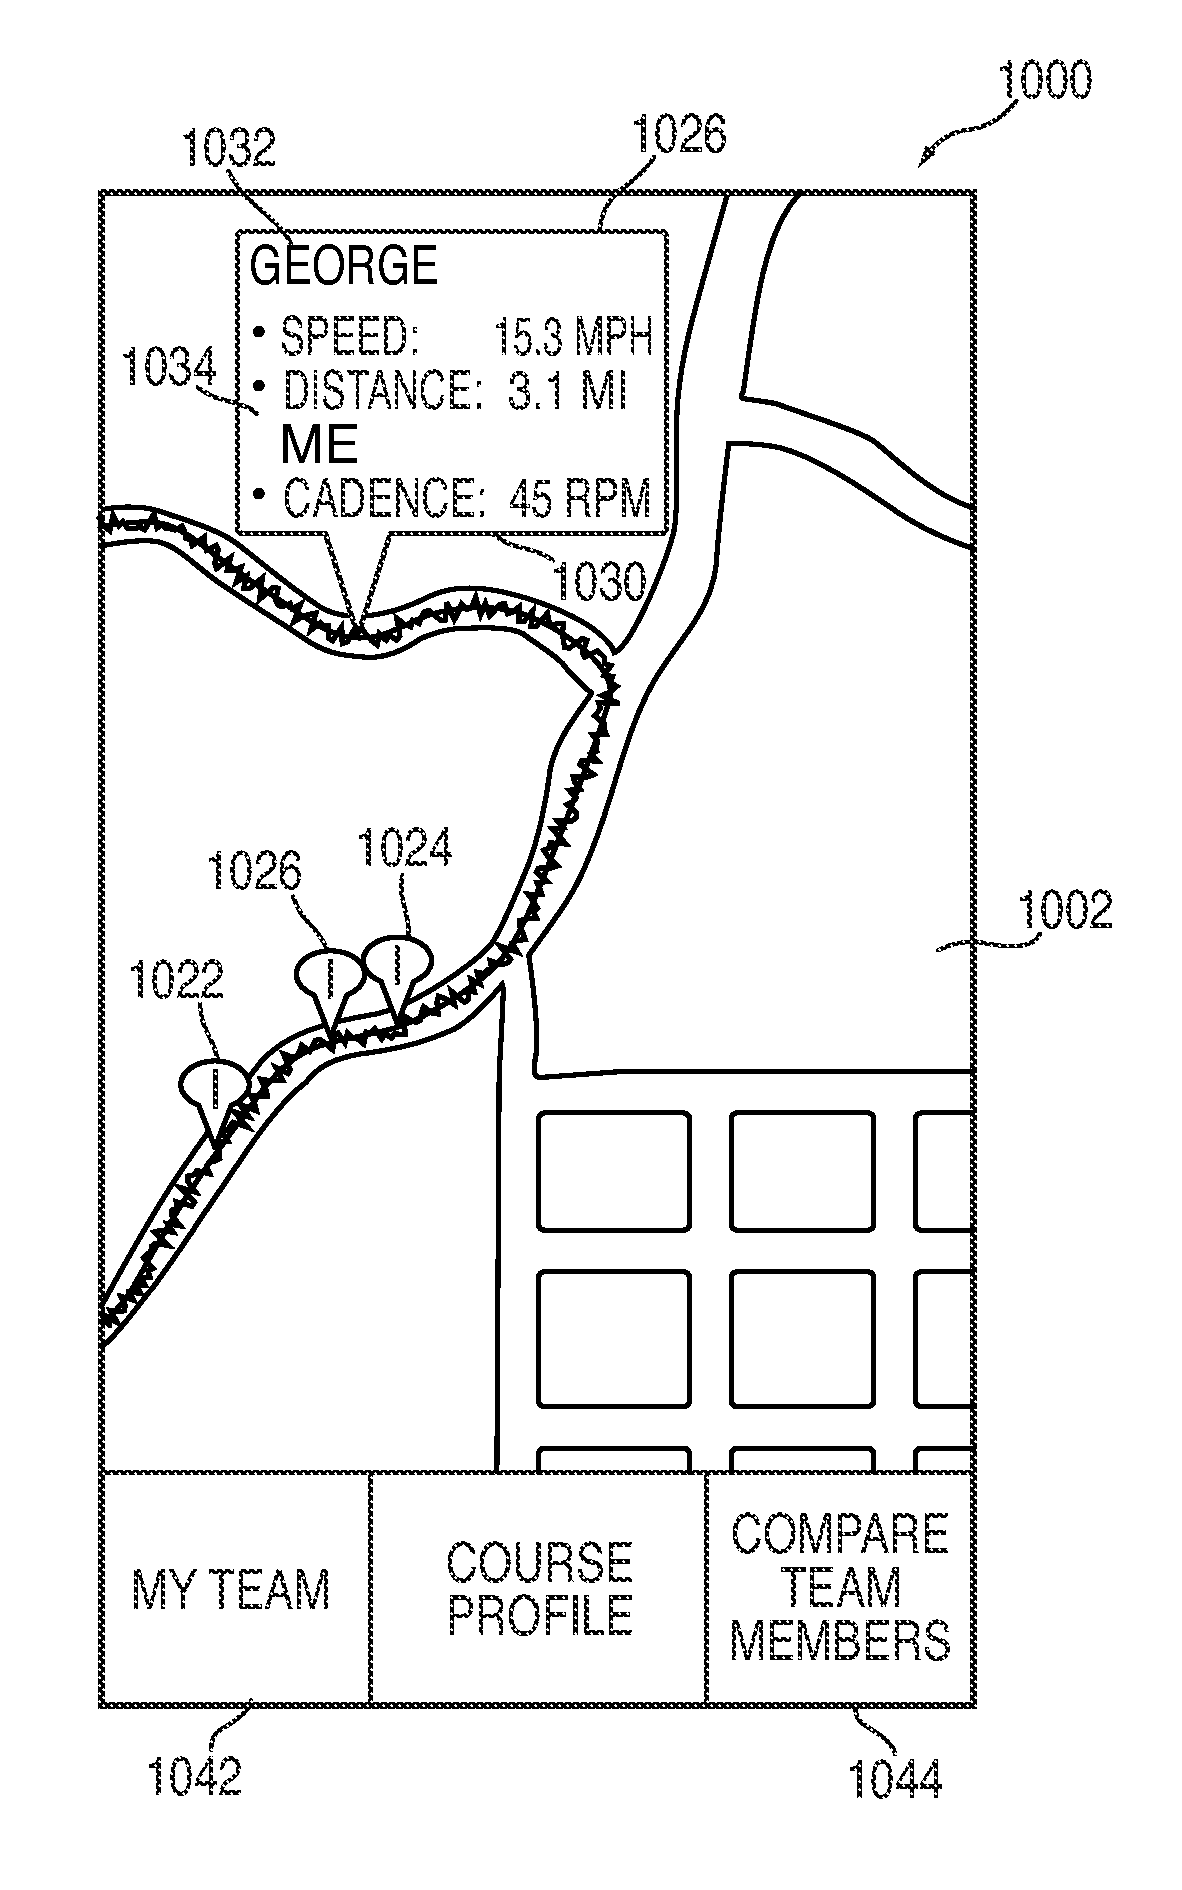 Systems and methods for integrating a portable electronic device with a bicycle